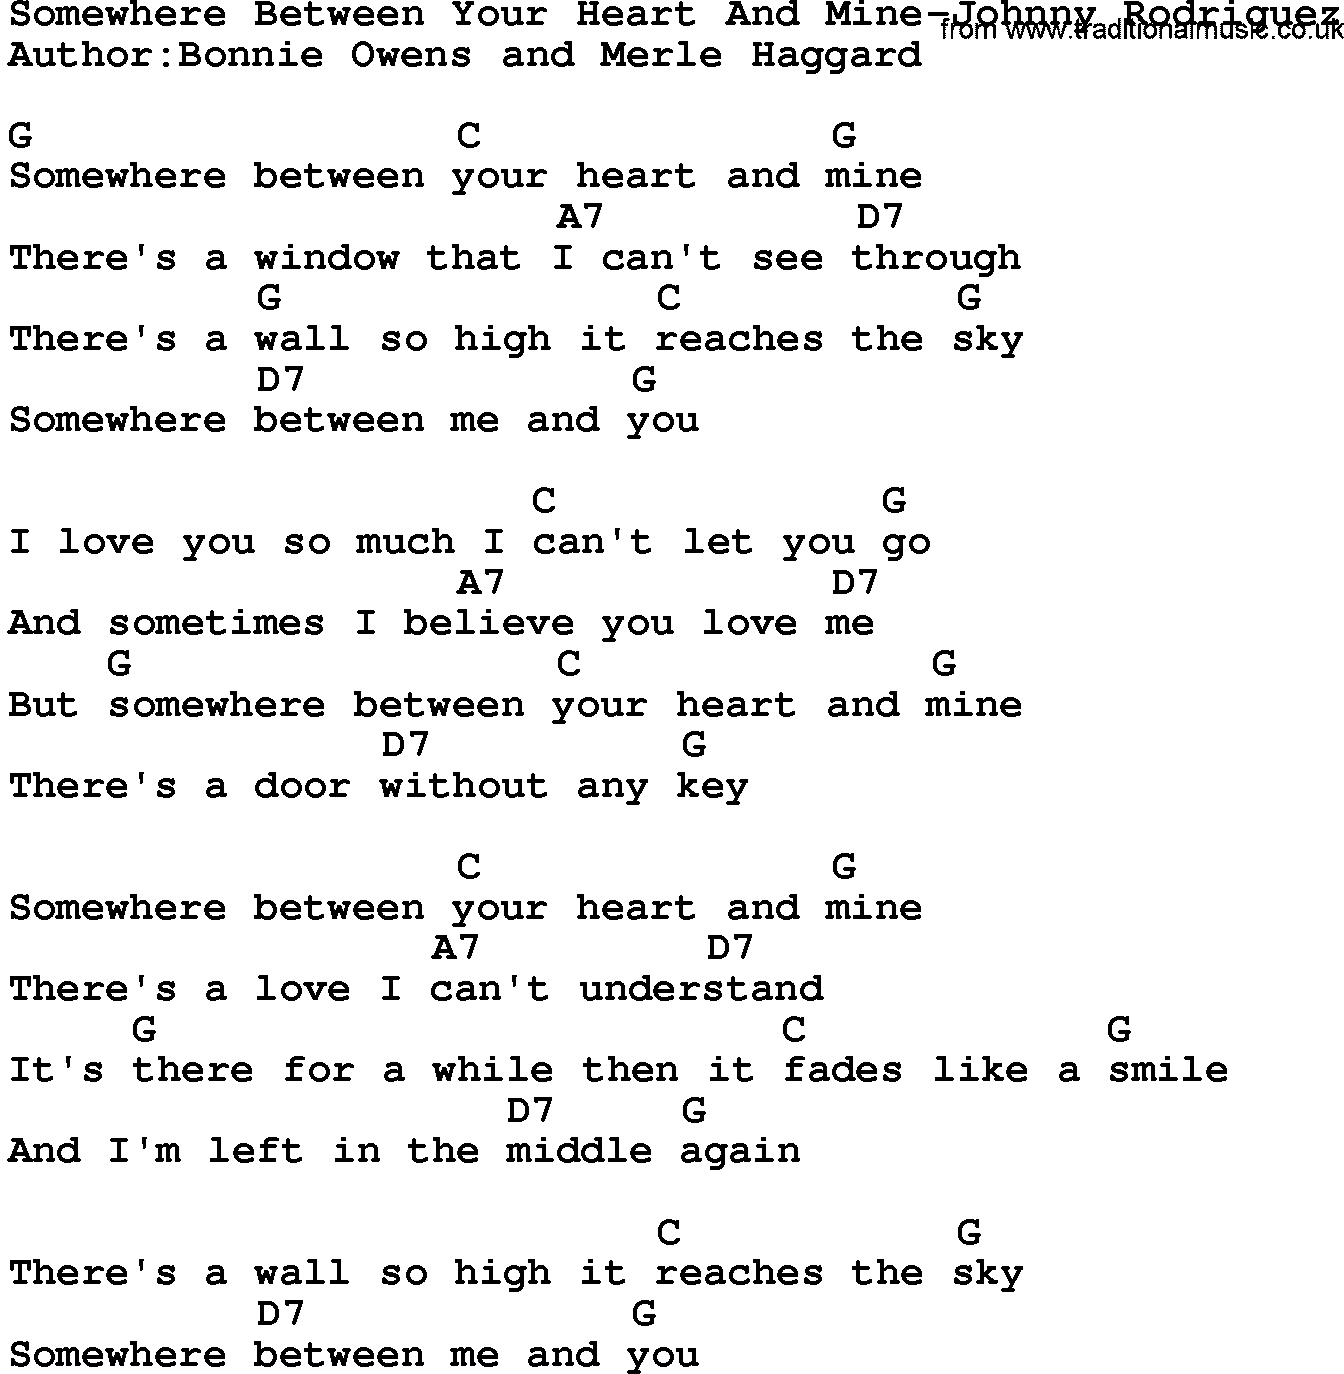 Country music song: Somewhere Between Your Heart And Mine-Johnny Rodriguez lyrics and chords